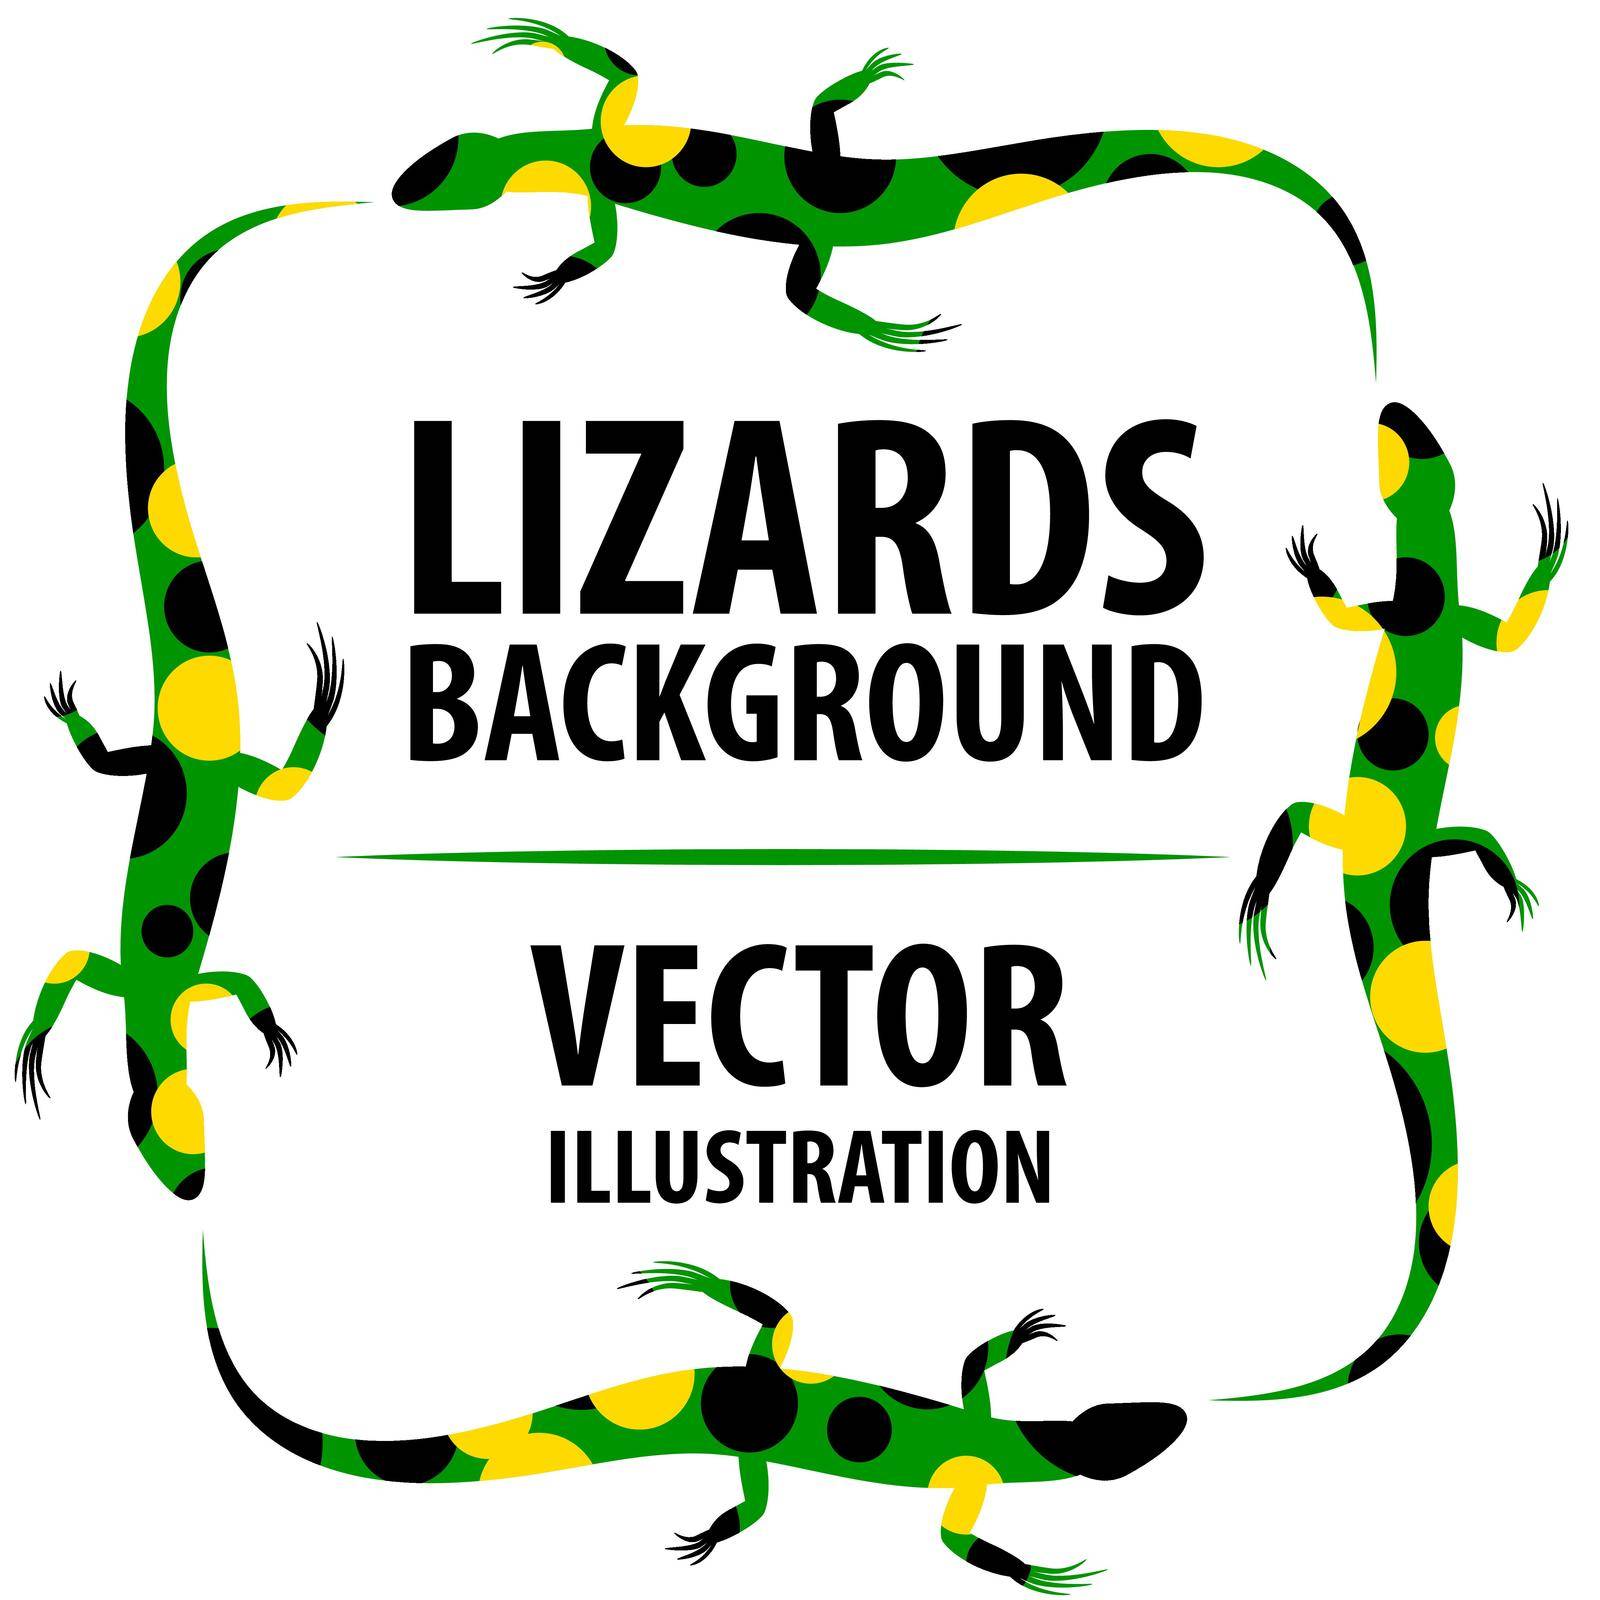 Background with lizards. Cartoon flat characters. Vector Image